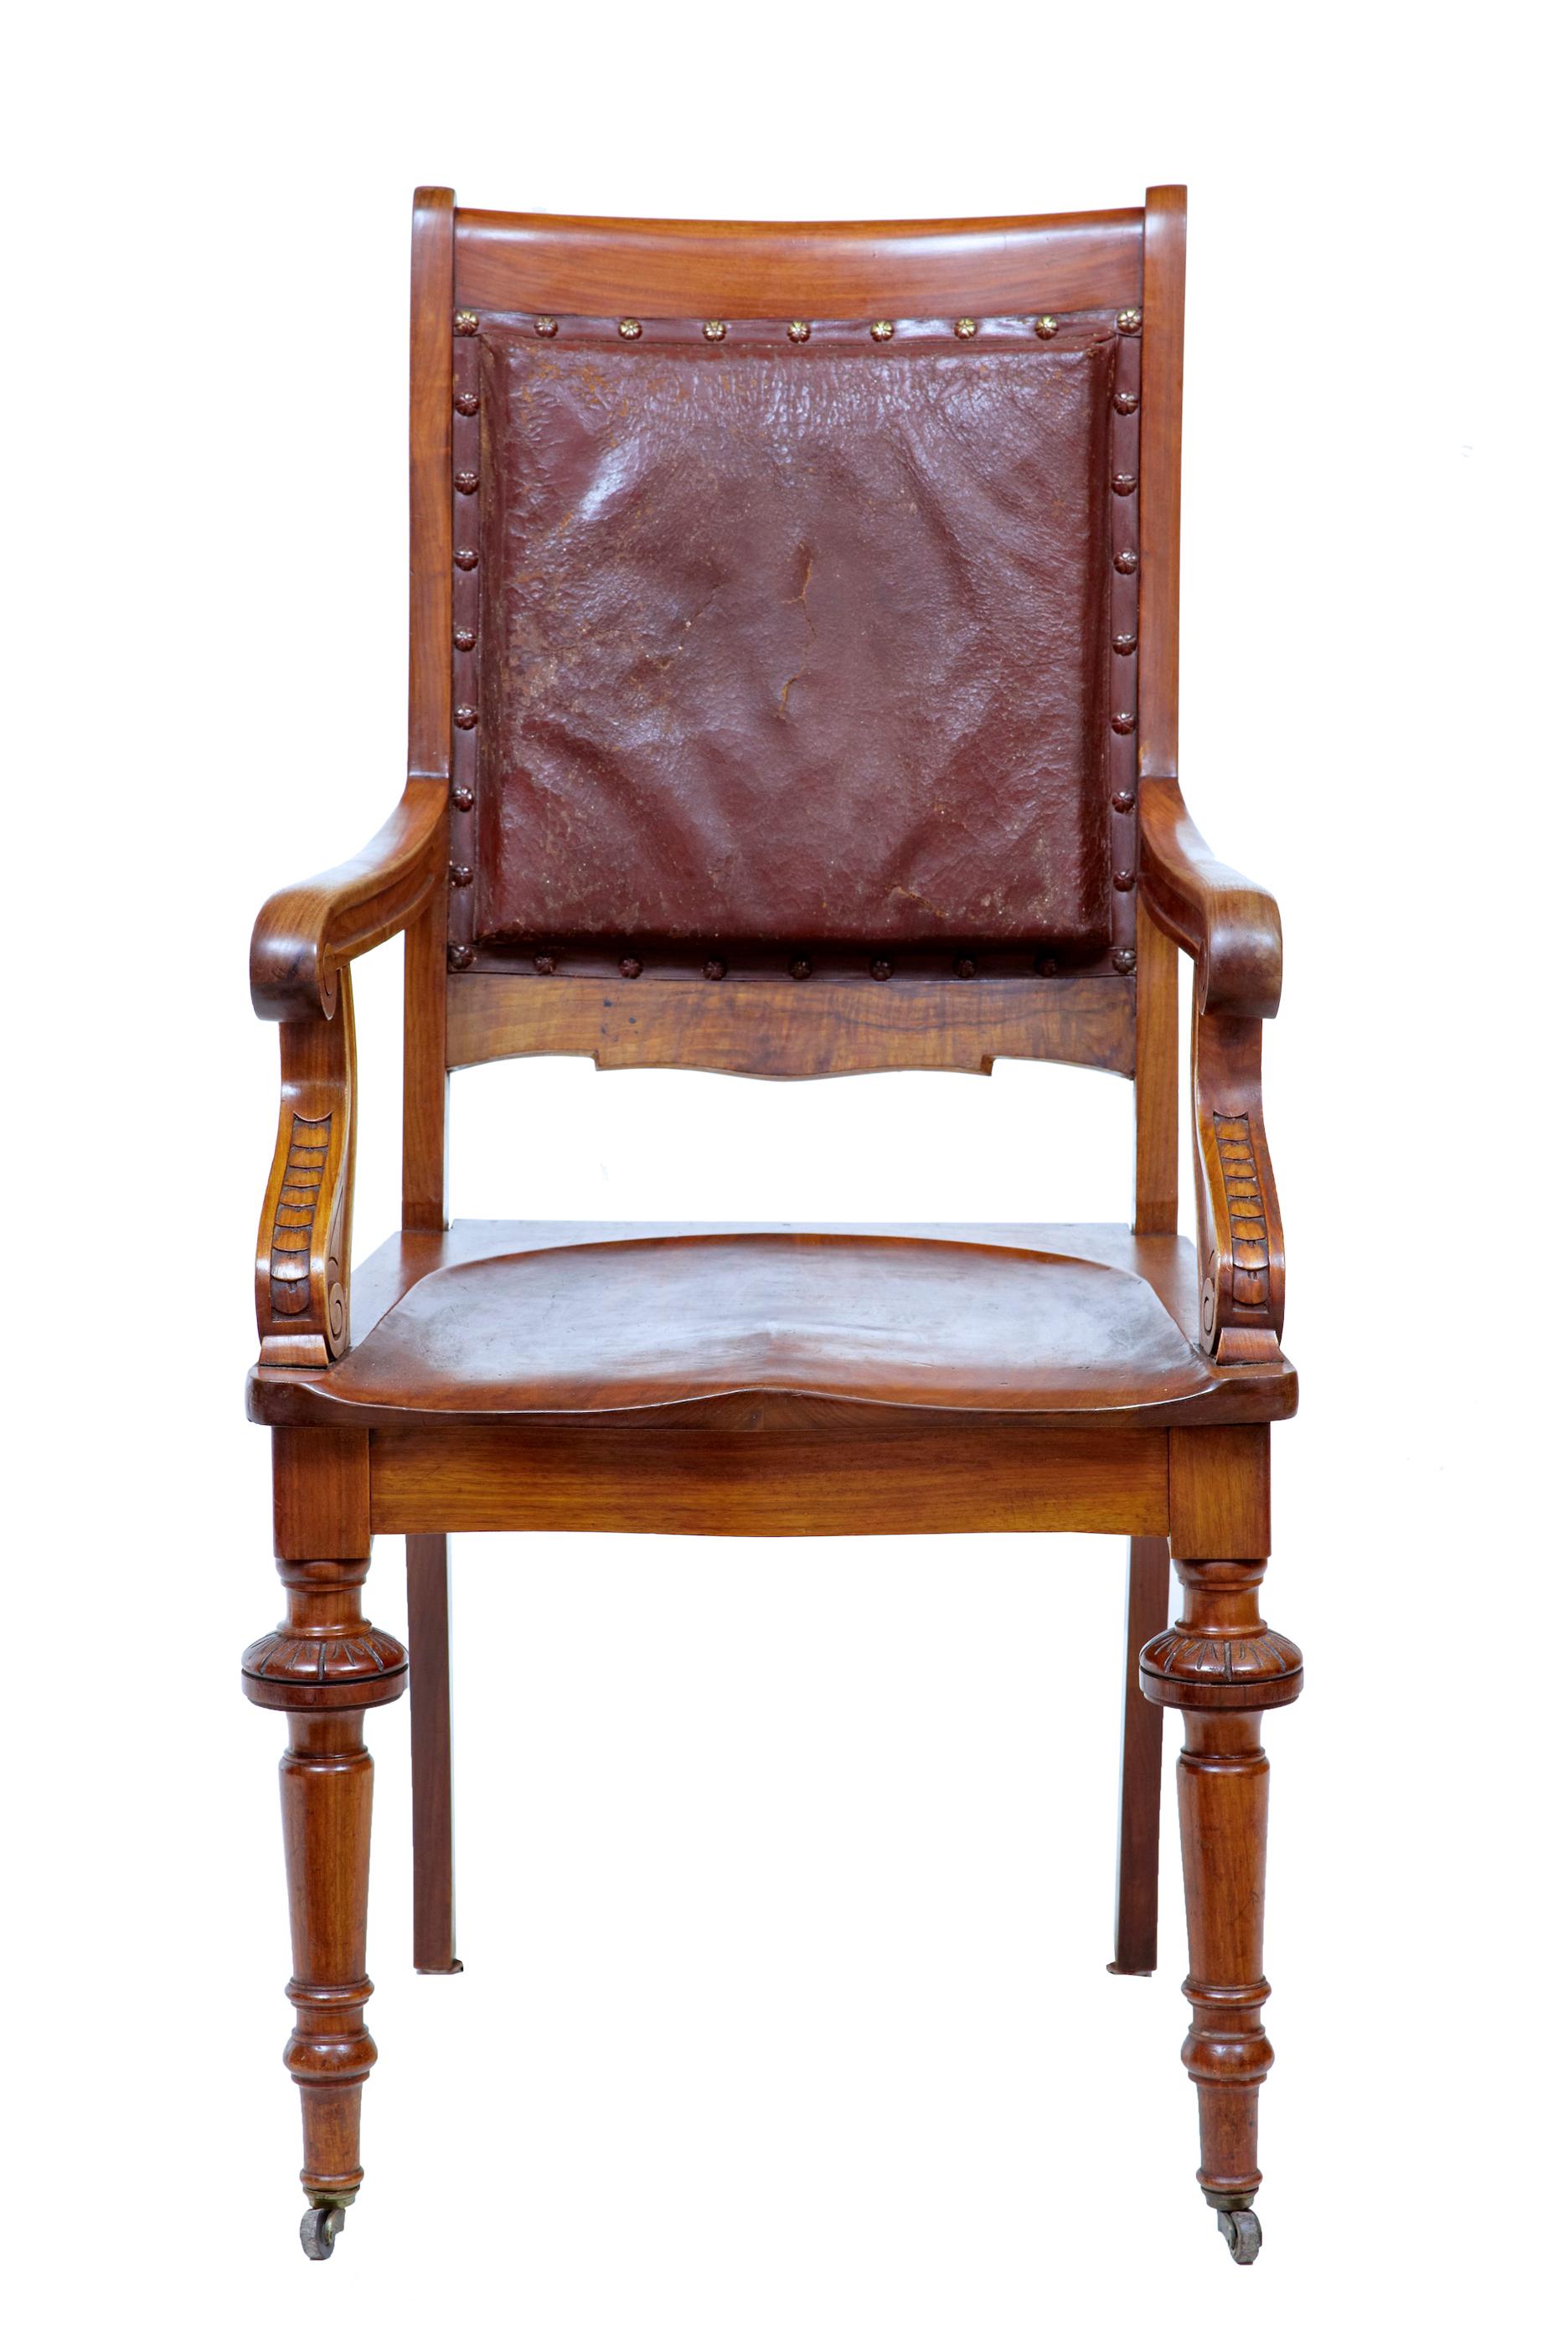 19th century Arts & Crafts mahogany desk chair circa 1890.

Good quality mahogany arts and crafts office chair. Leather backrest, with carved arms and a shaped solid seat. Original leather with stud work. Standing on front turned legs with brass